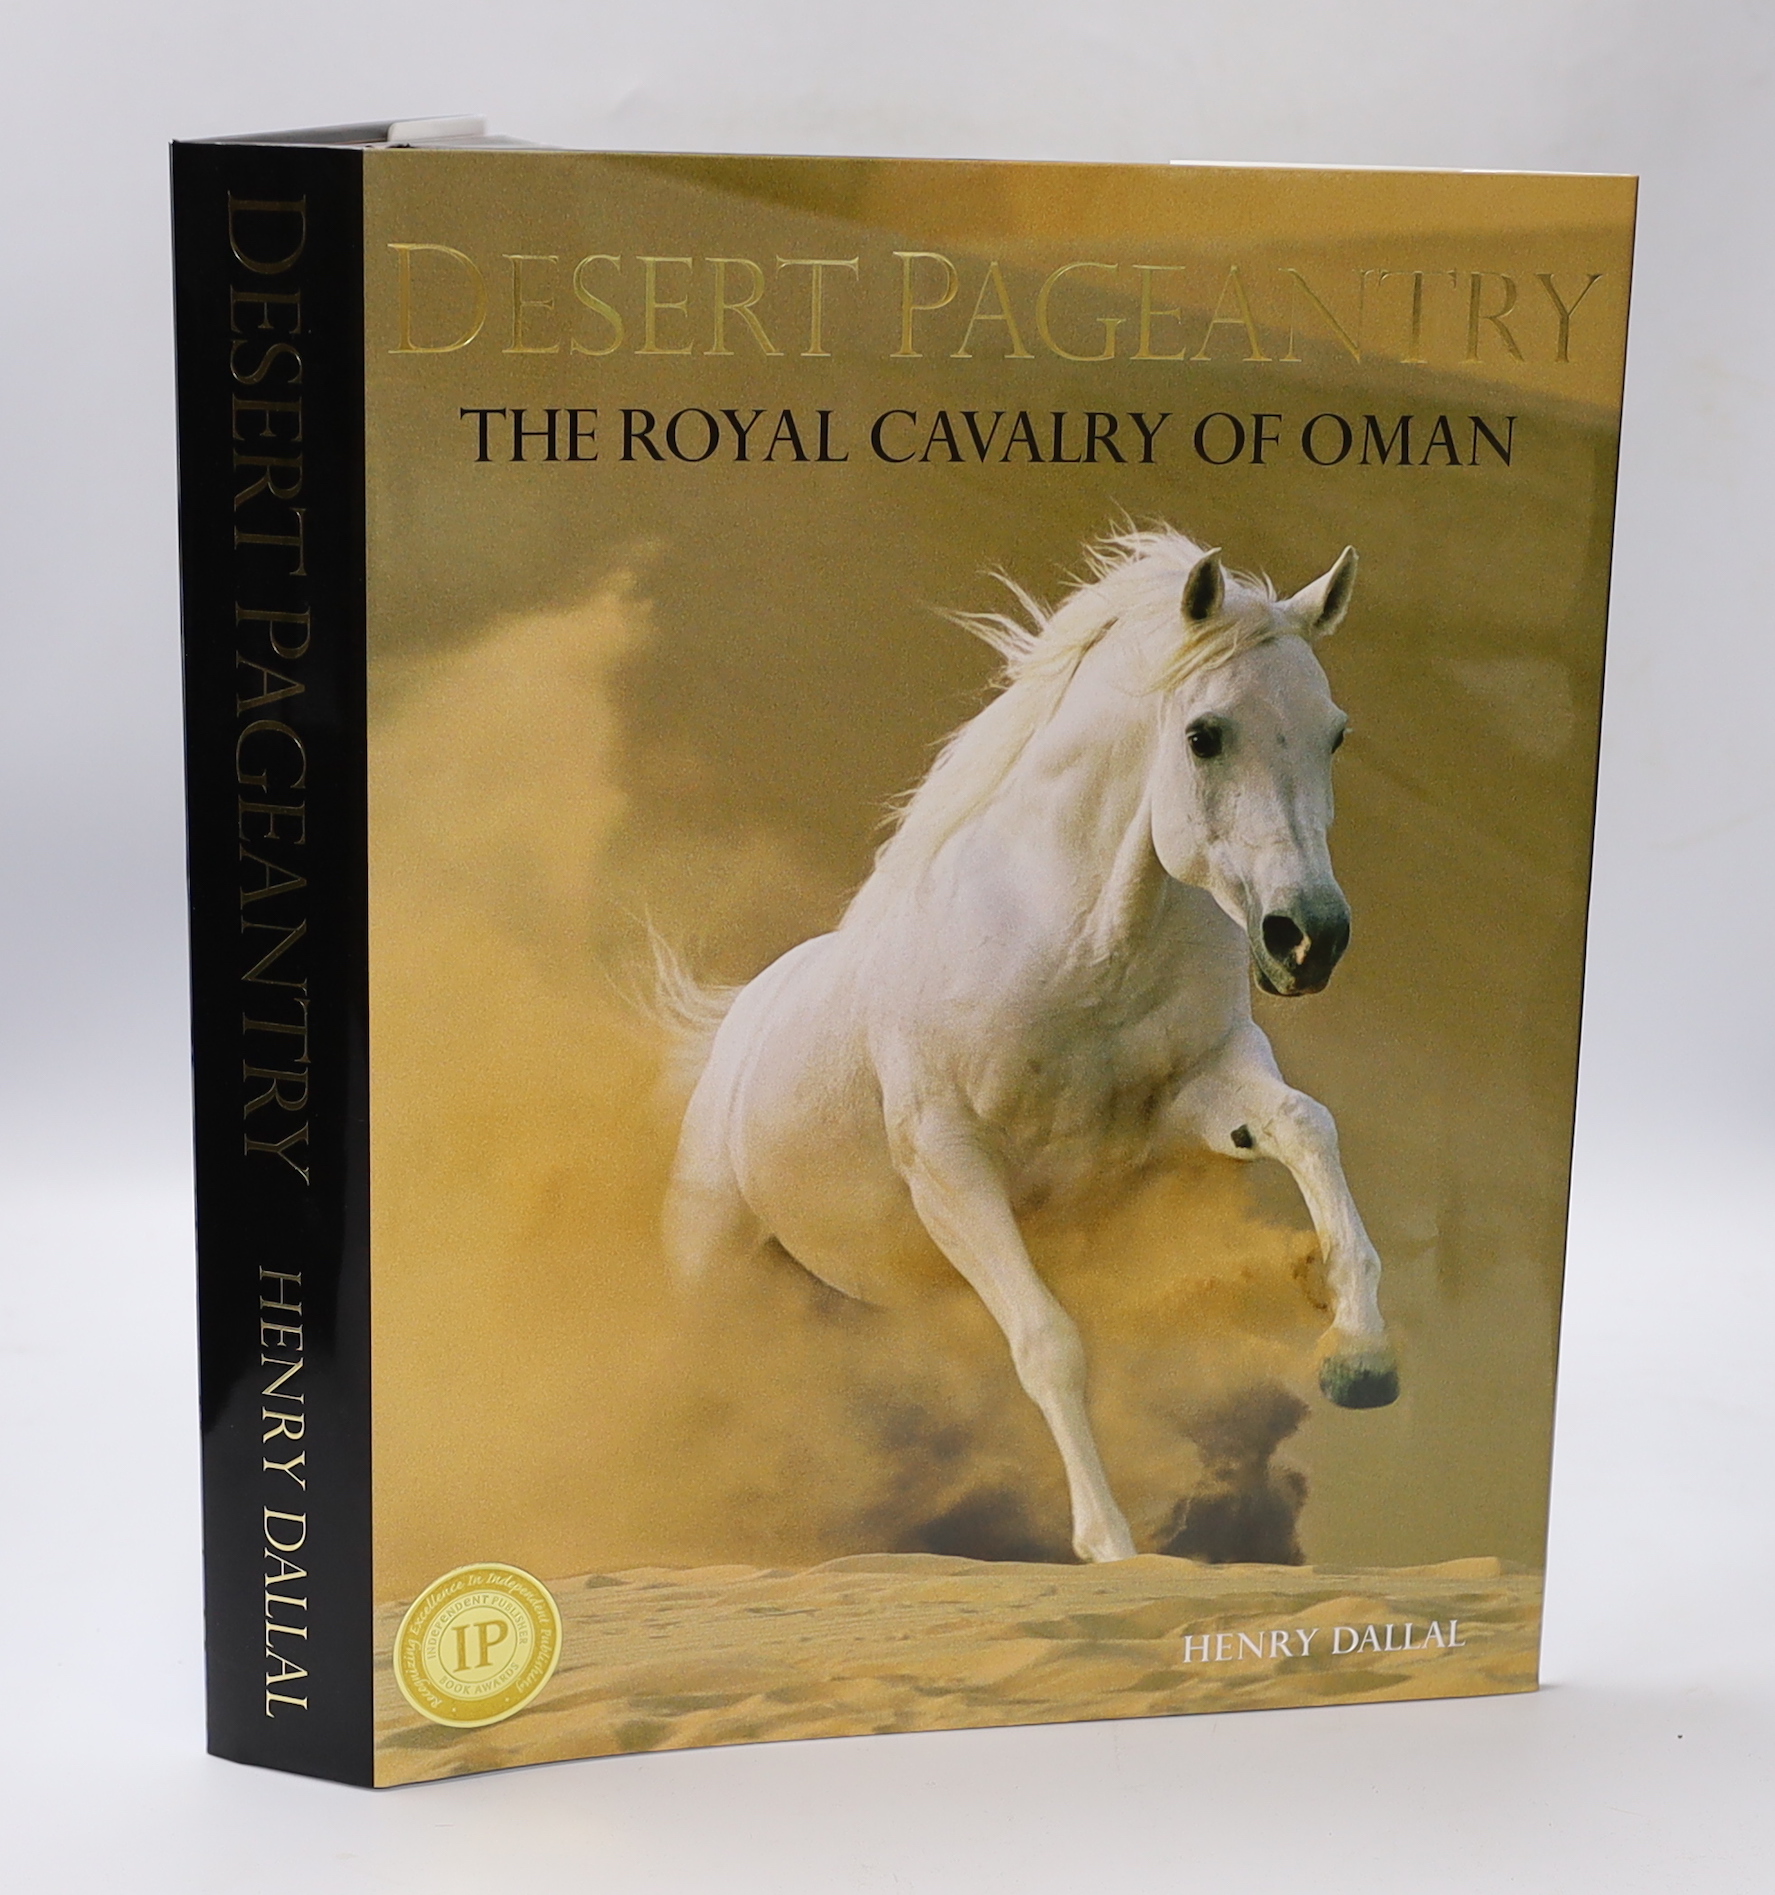 Dallal, Henry - Desert Pageantry: The Royal Cavalry of Oman, signed, folio, black pictorial boards gilt, in d/j, with original box, 2012, Note: Gold medal winner for the most outstanding design of the year, at the Indepe